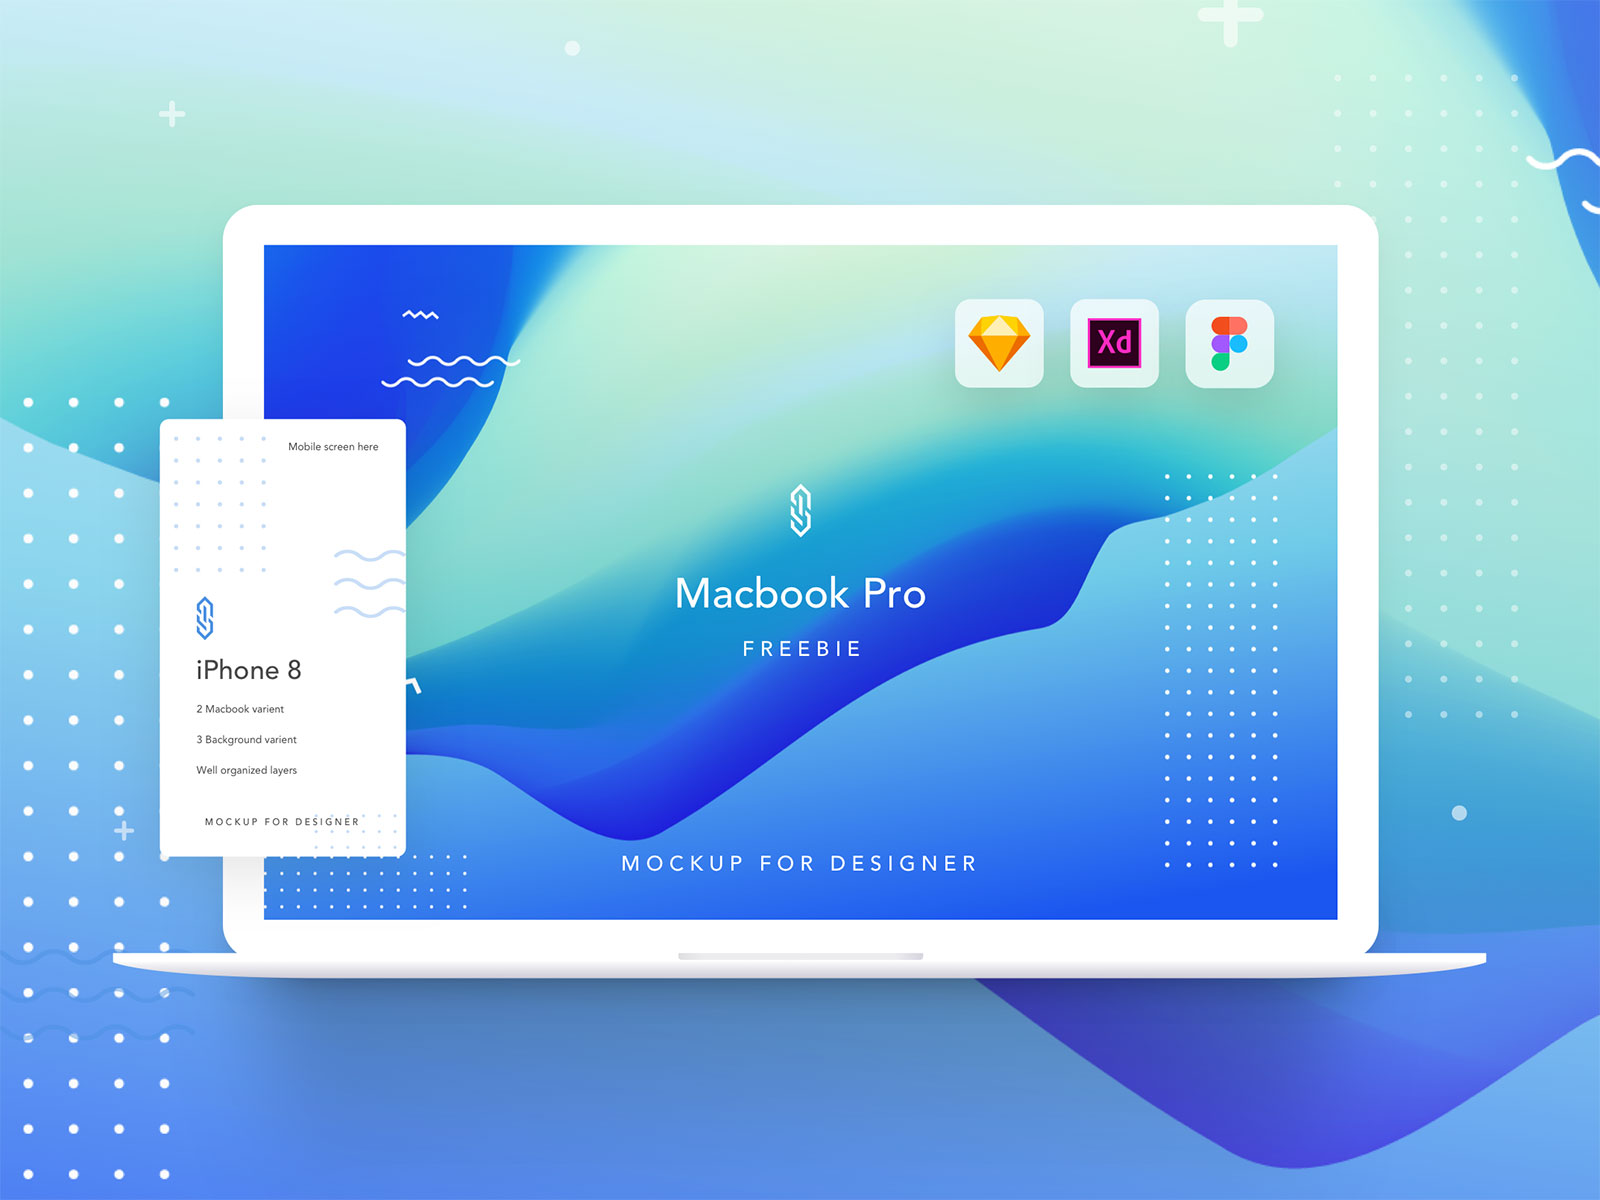 the best free cleaner for mac